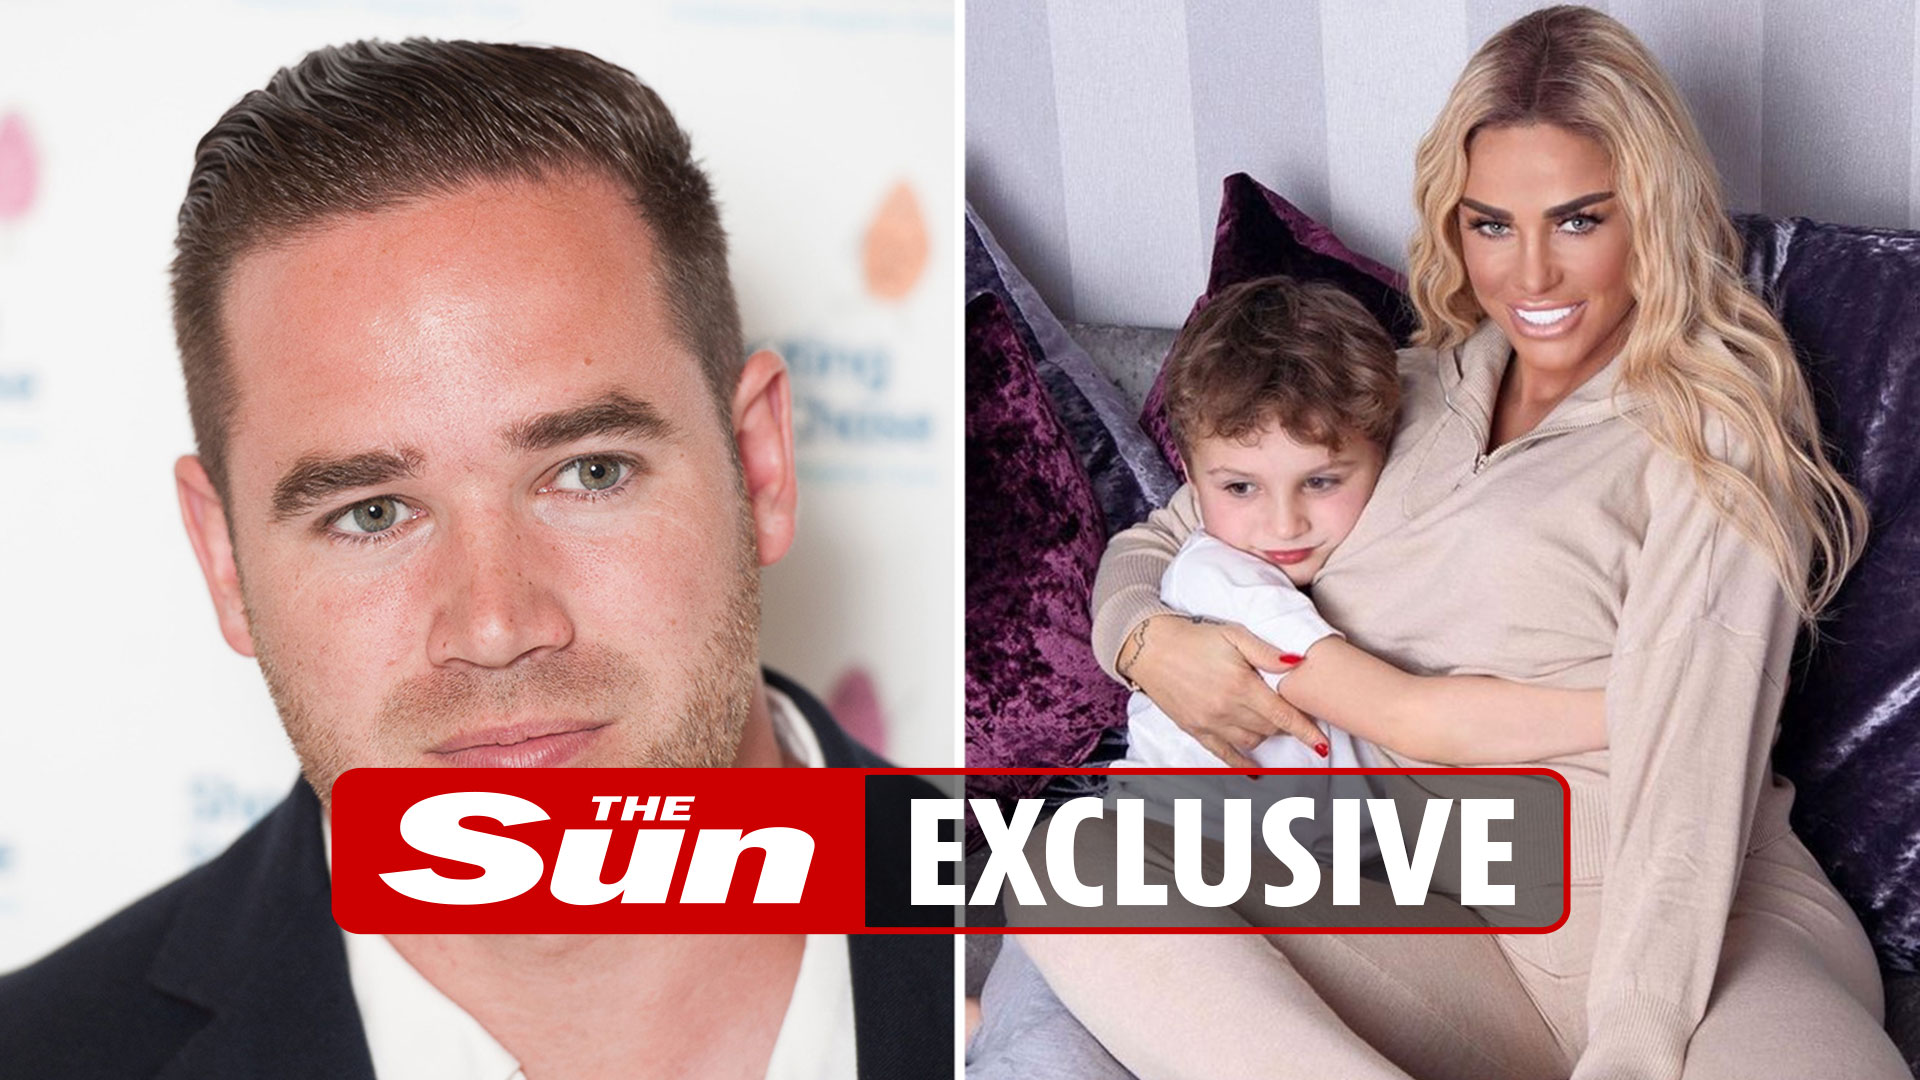 Katie Price's furious ex Kieran Hayler hits out at her after 'dangerous' video of son not wearing seatbelt